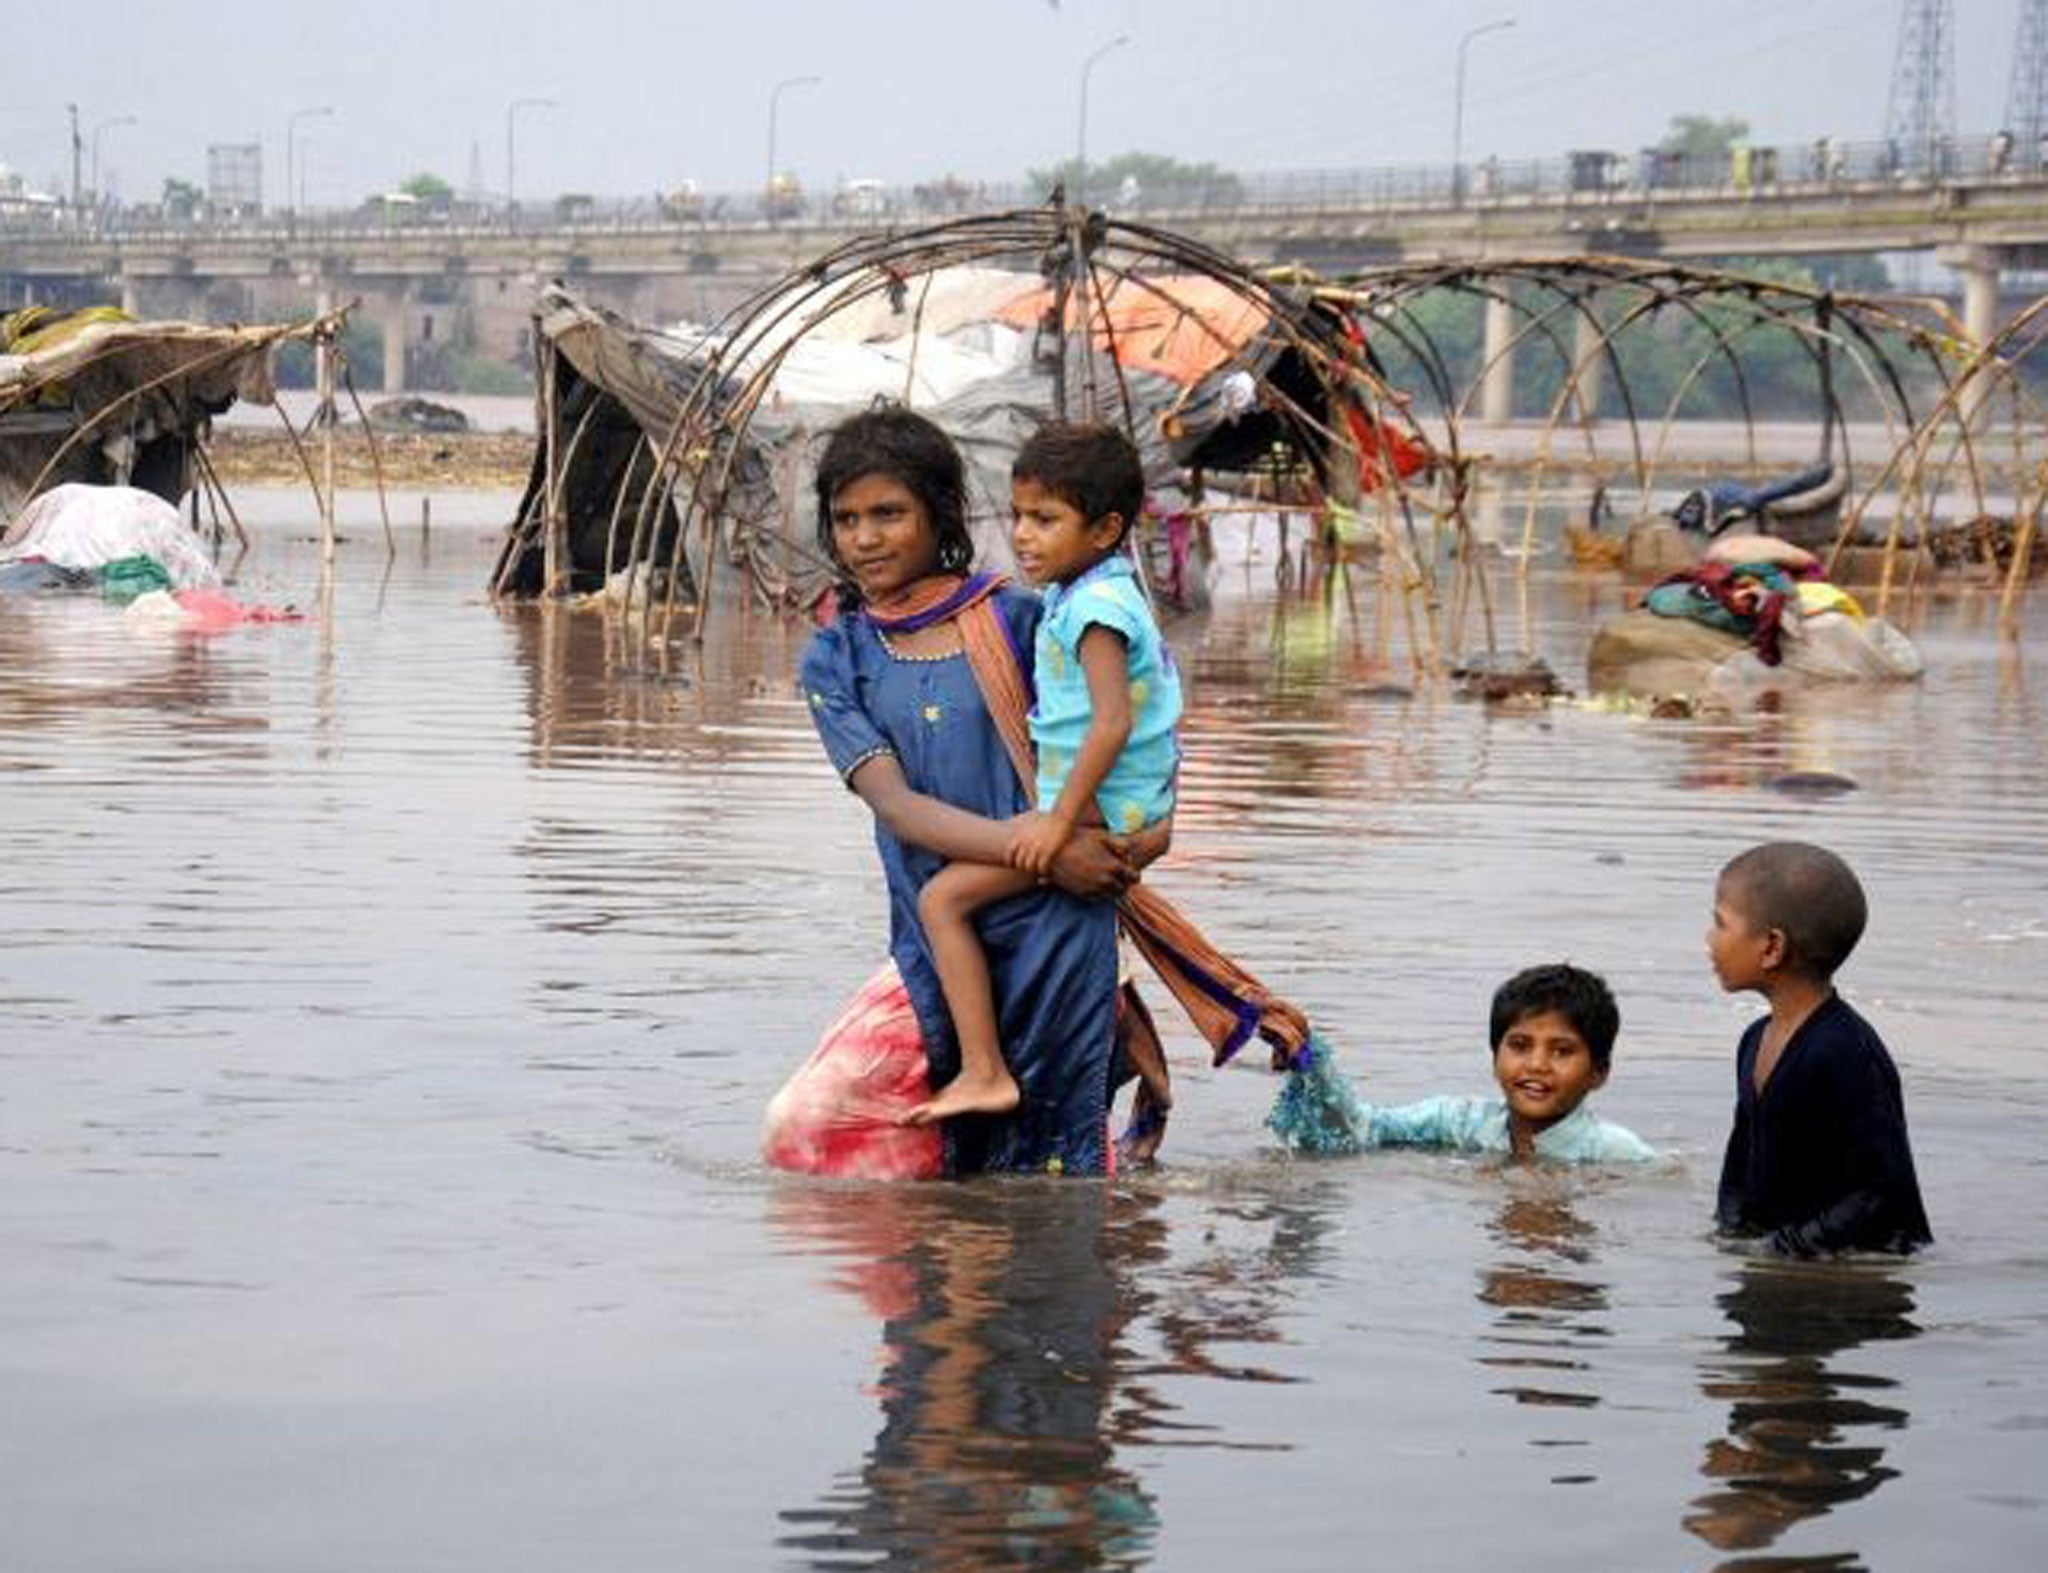 Pakistani children walk in the flooded Ravi river in eastern Pakistan's Lahore